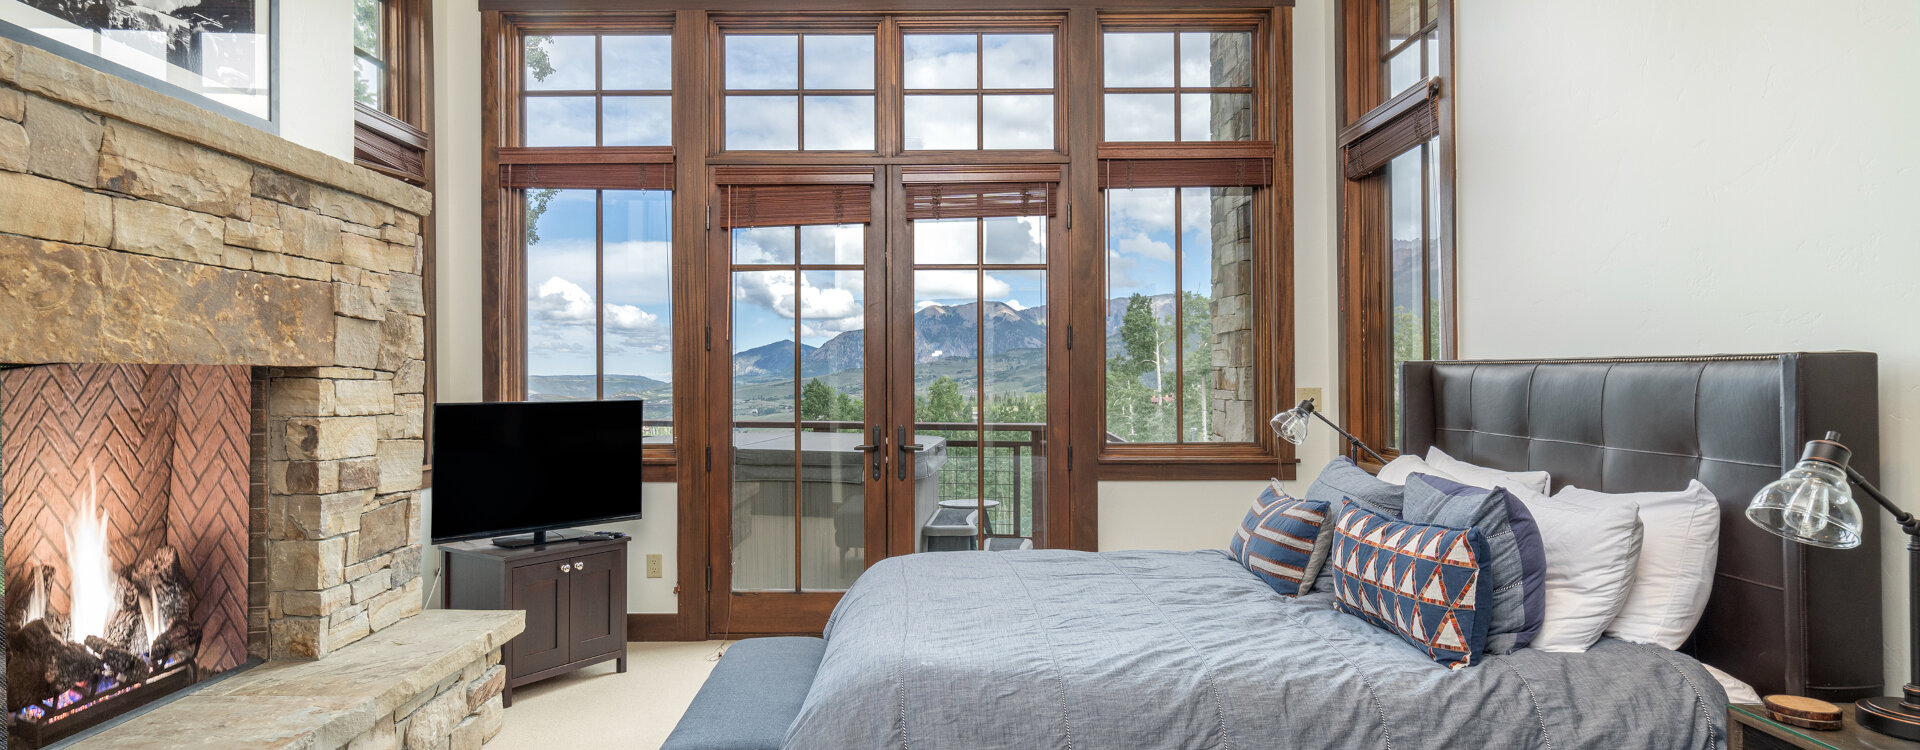 1.8-telluride-aspens-at-courcheval-seondary-bedroom